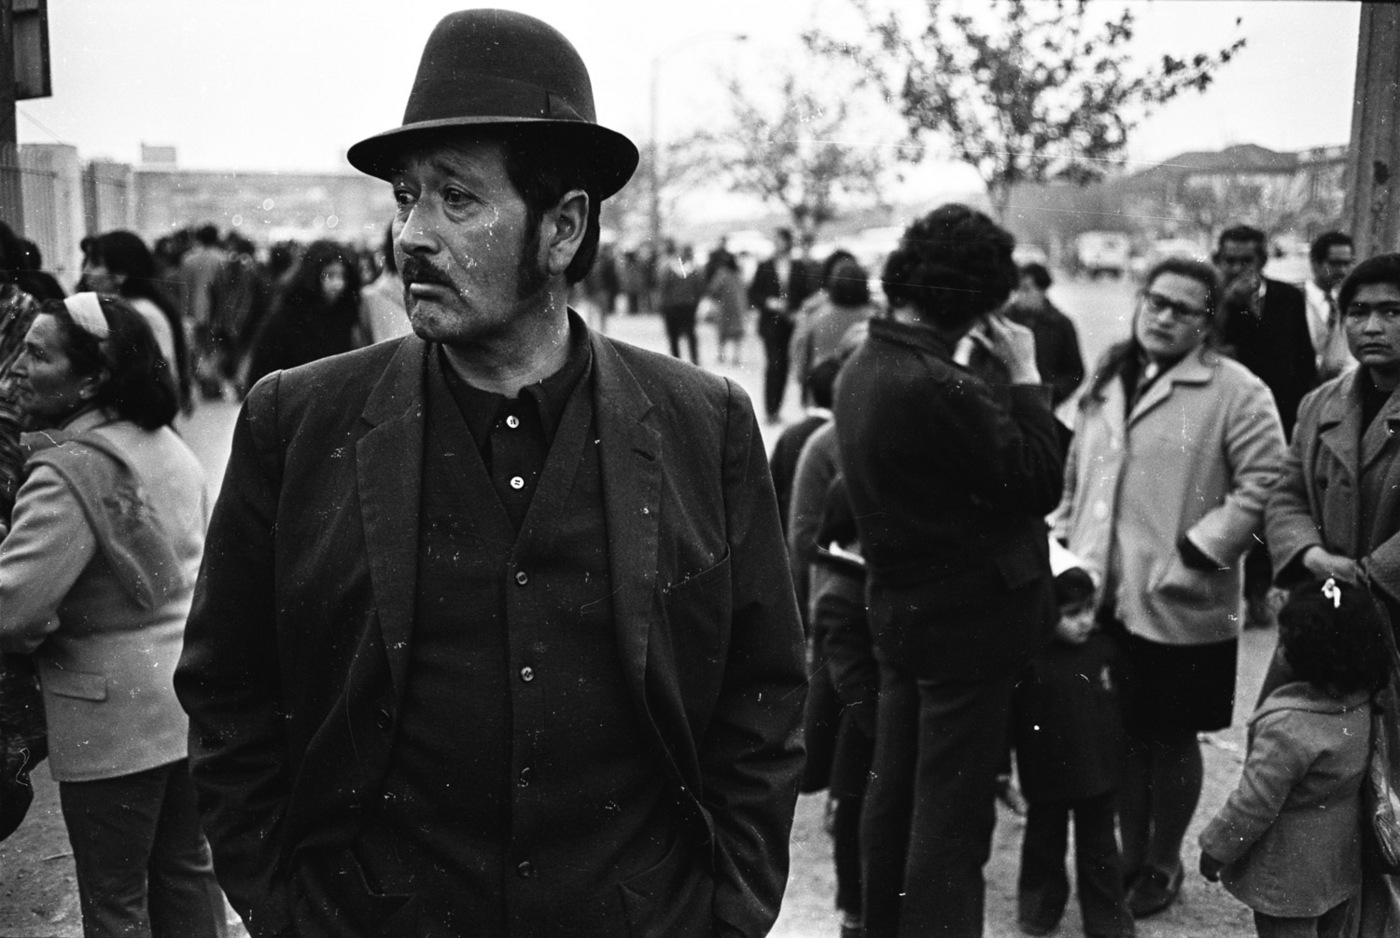 Loved ones looking for information about the missing. : Chile: 40 Years After the Coup d'Etat : David Burnett | Photographer